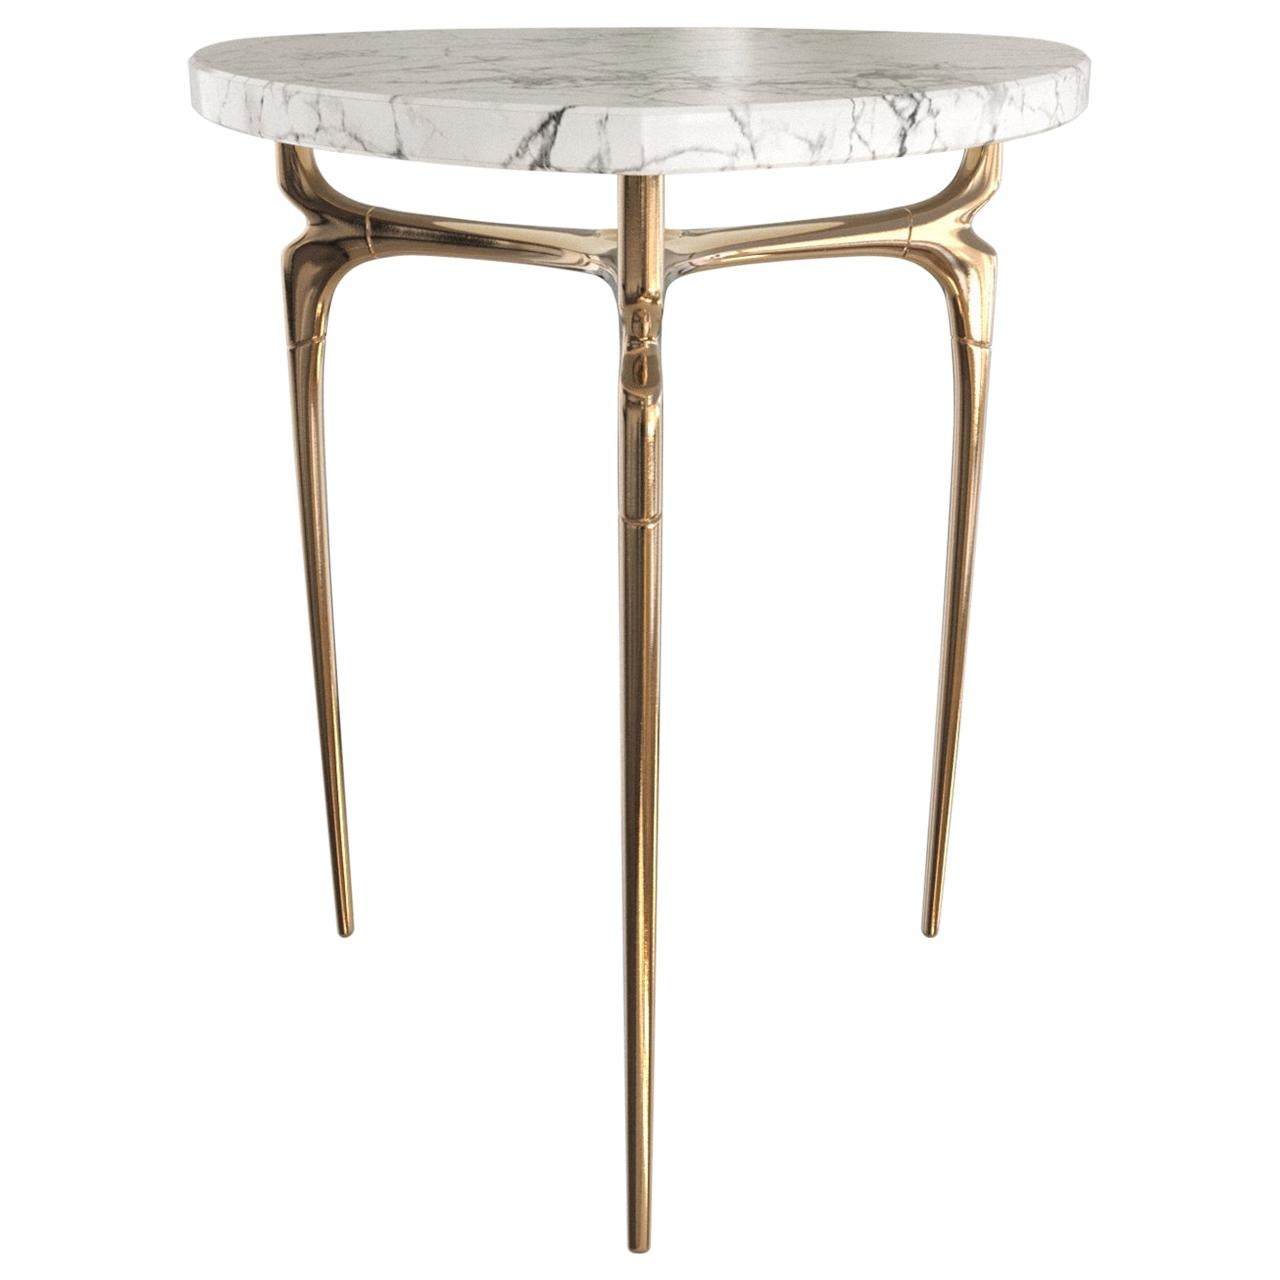 Cast  Avalon Table - Polished Bronze & Marble Top - Design by Michael Sean Stolworthy For Sale